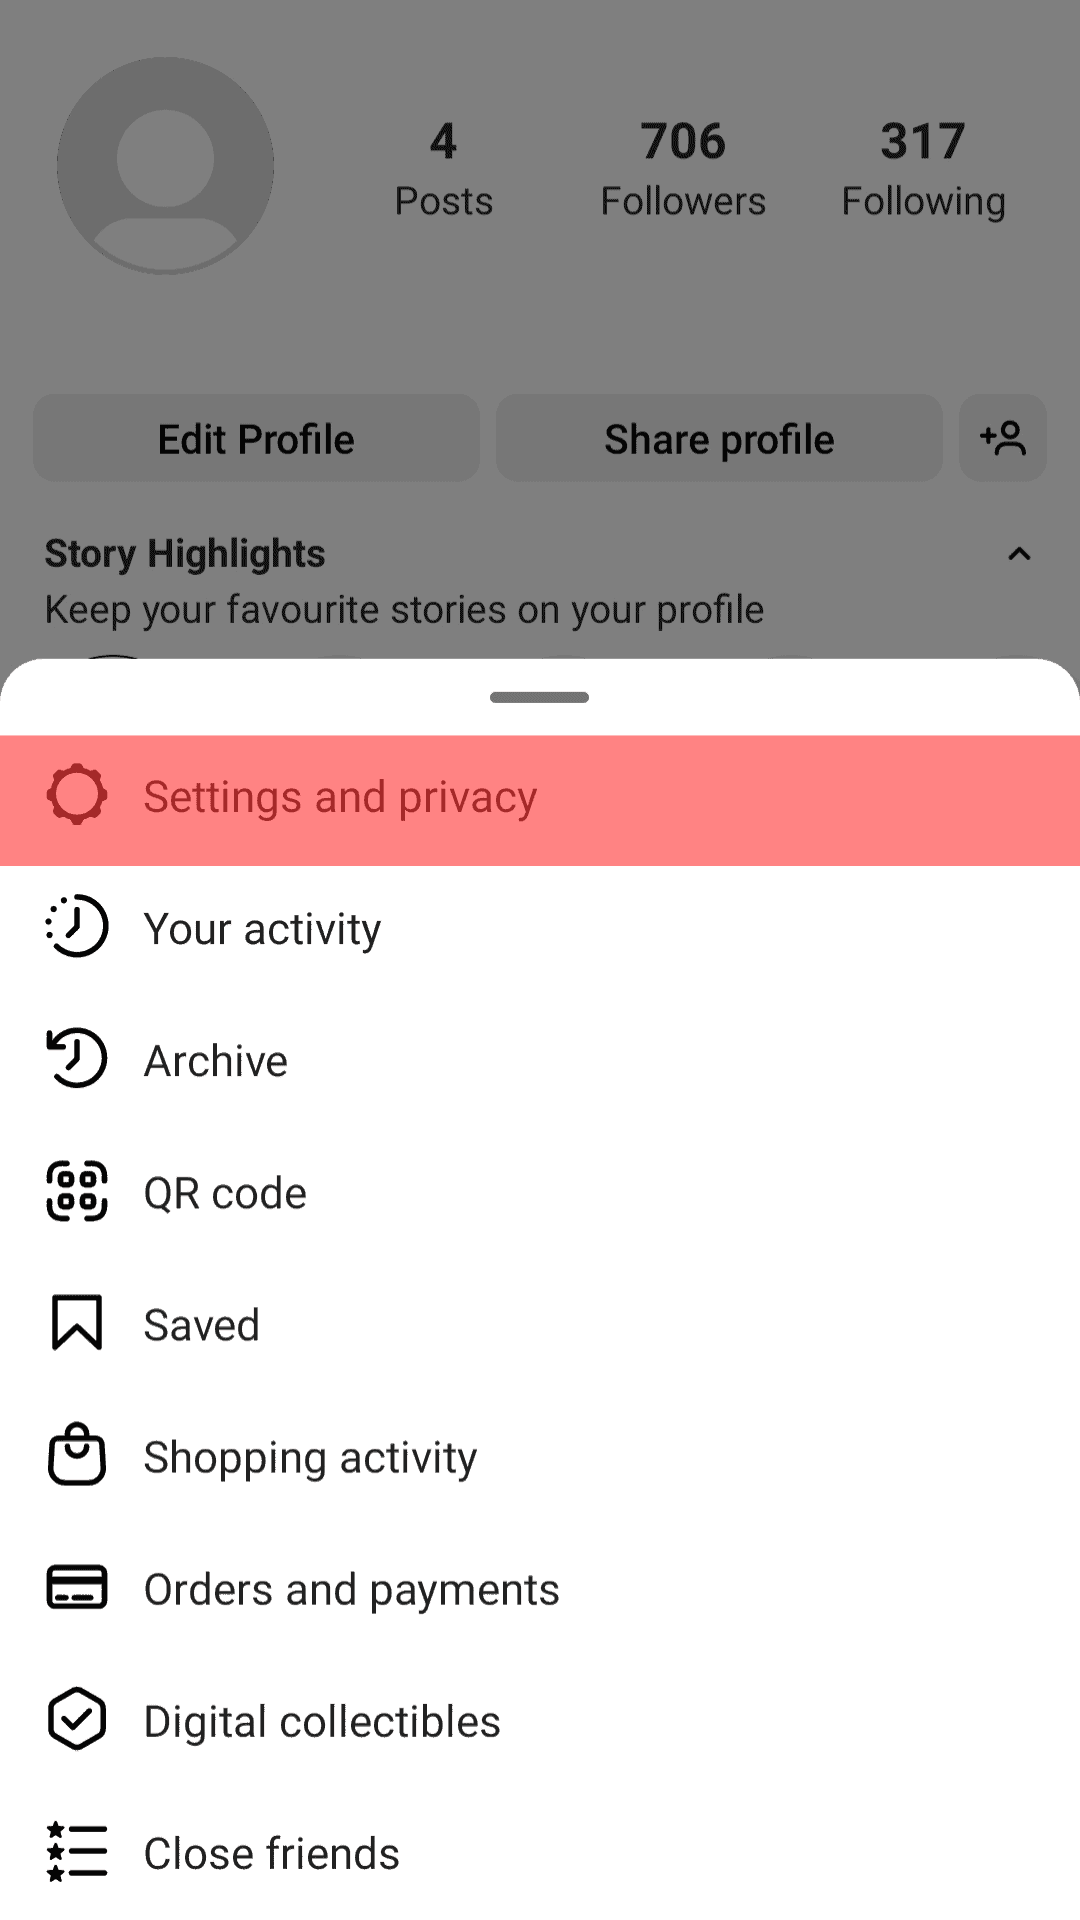 Go To Settings And Privacy